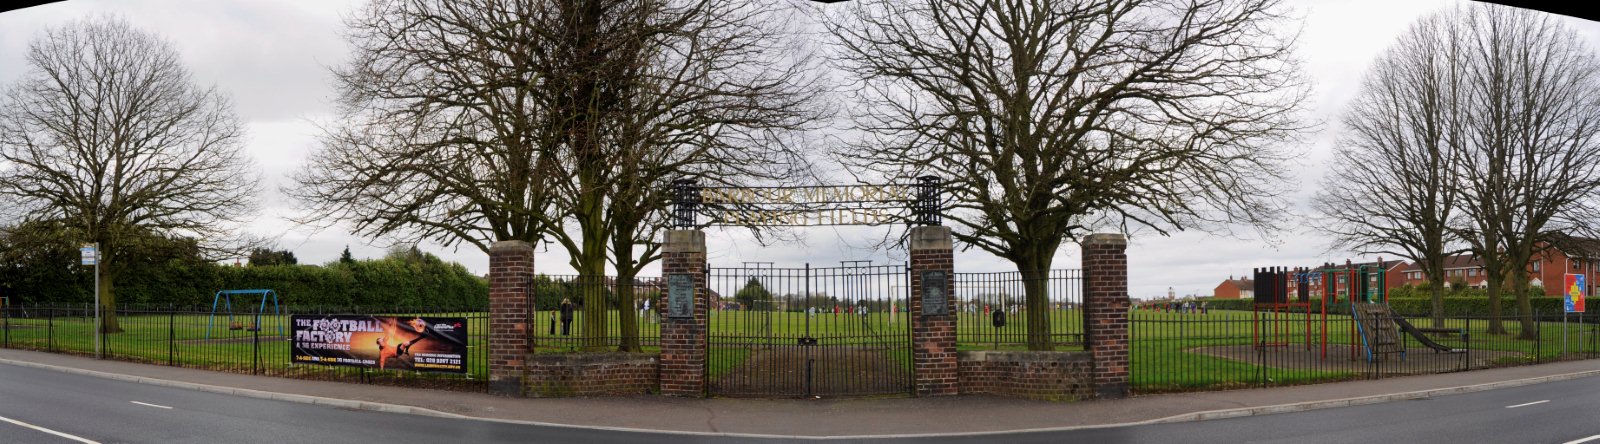 Barbour Memorial Playing Fields, Lisburn - Given to the town… - Flickr